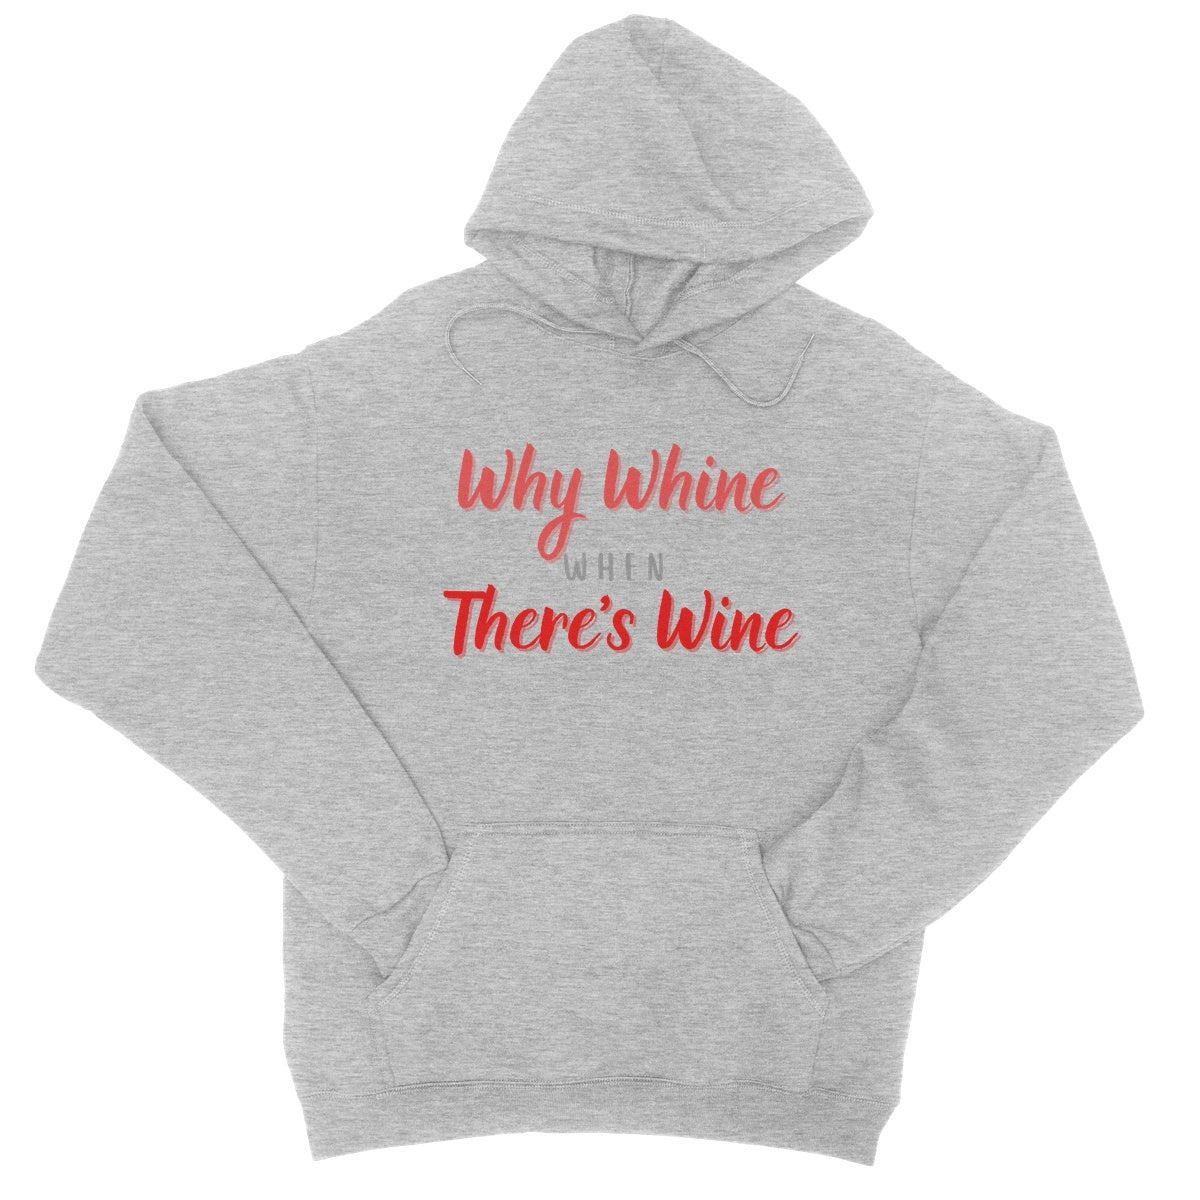 why whine when there's wine hoodie light grey